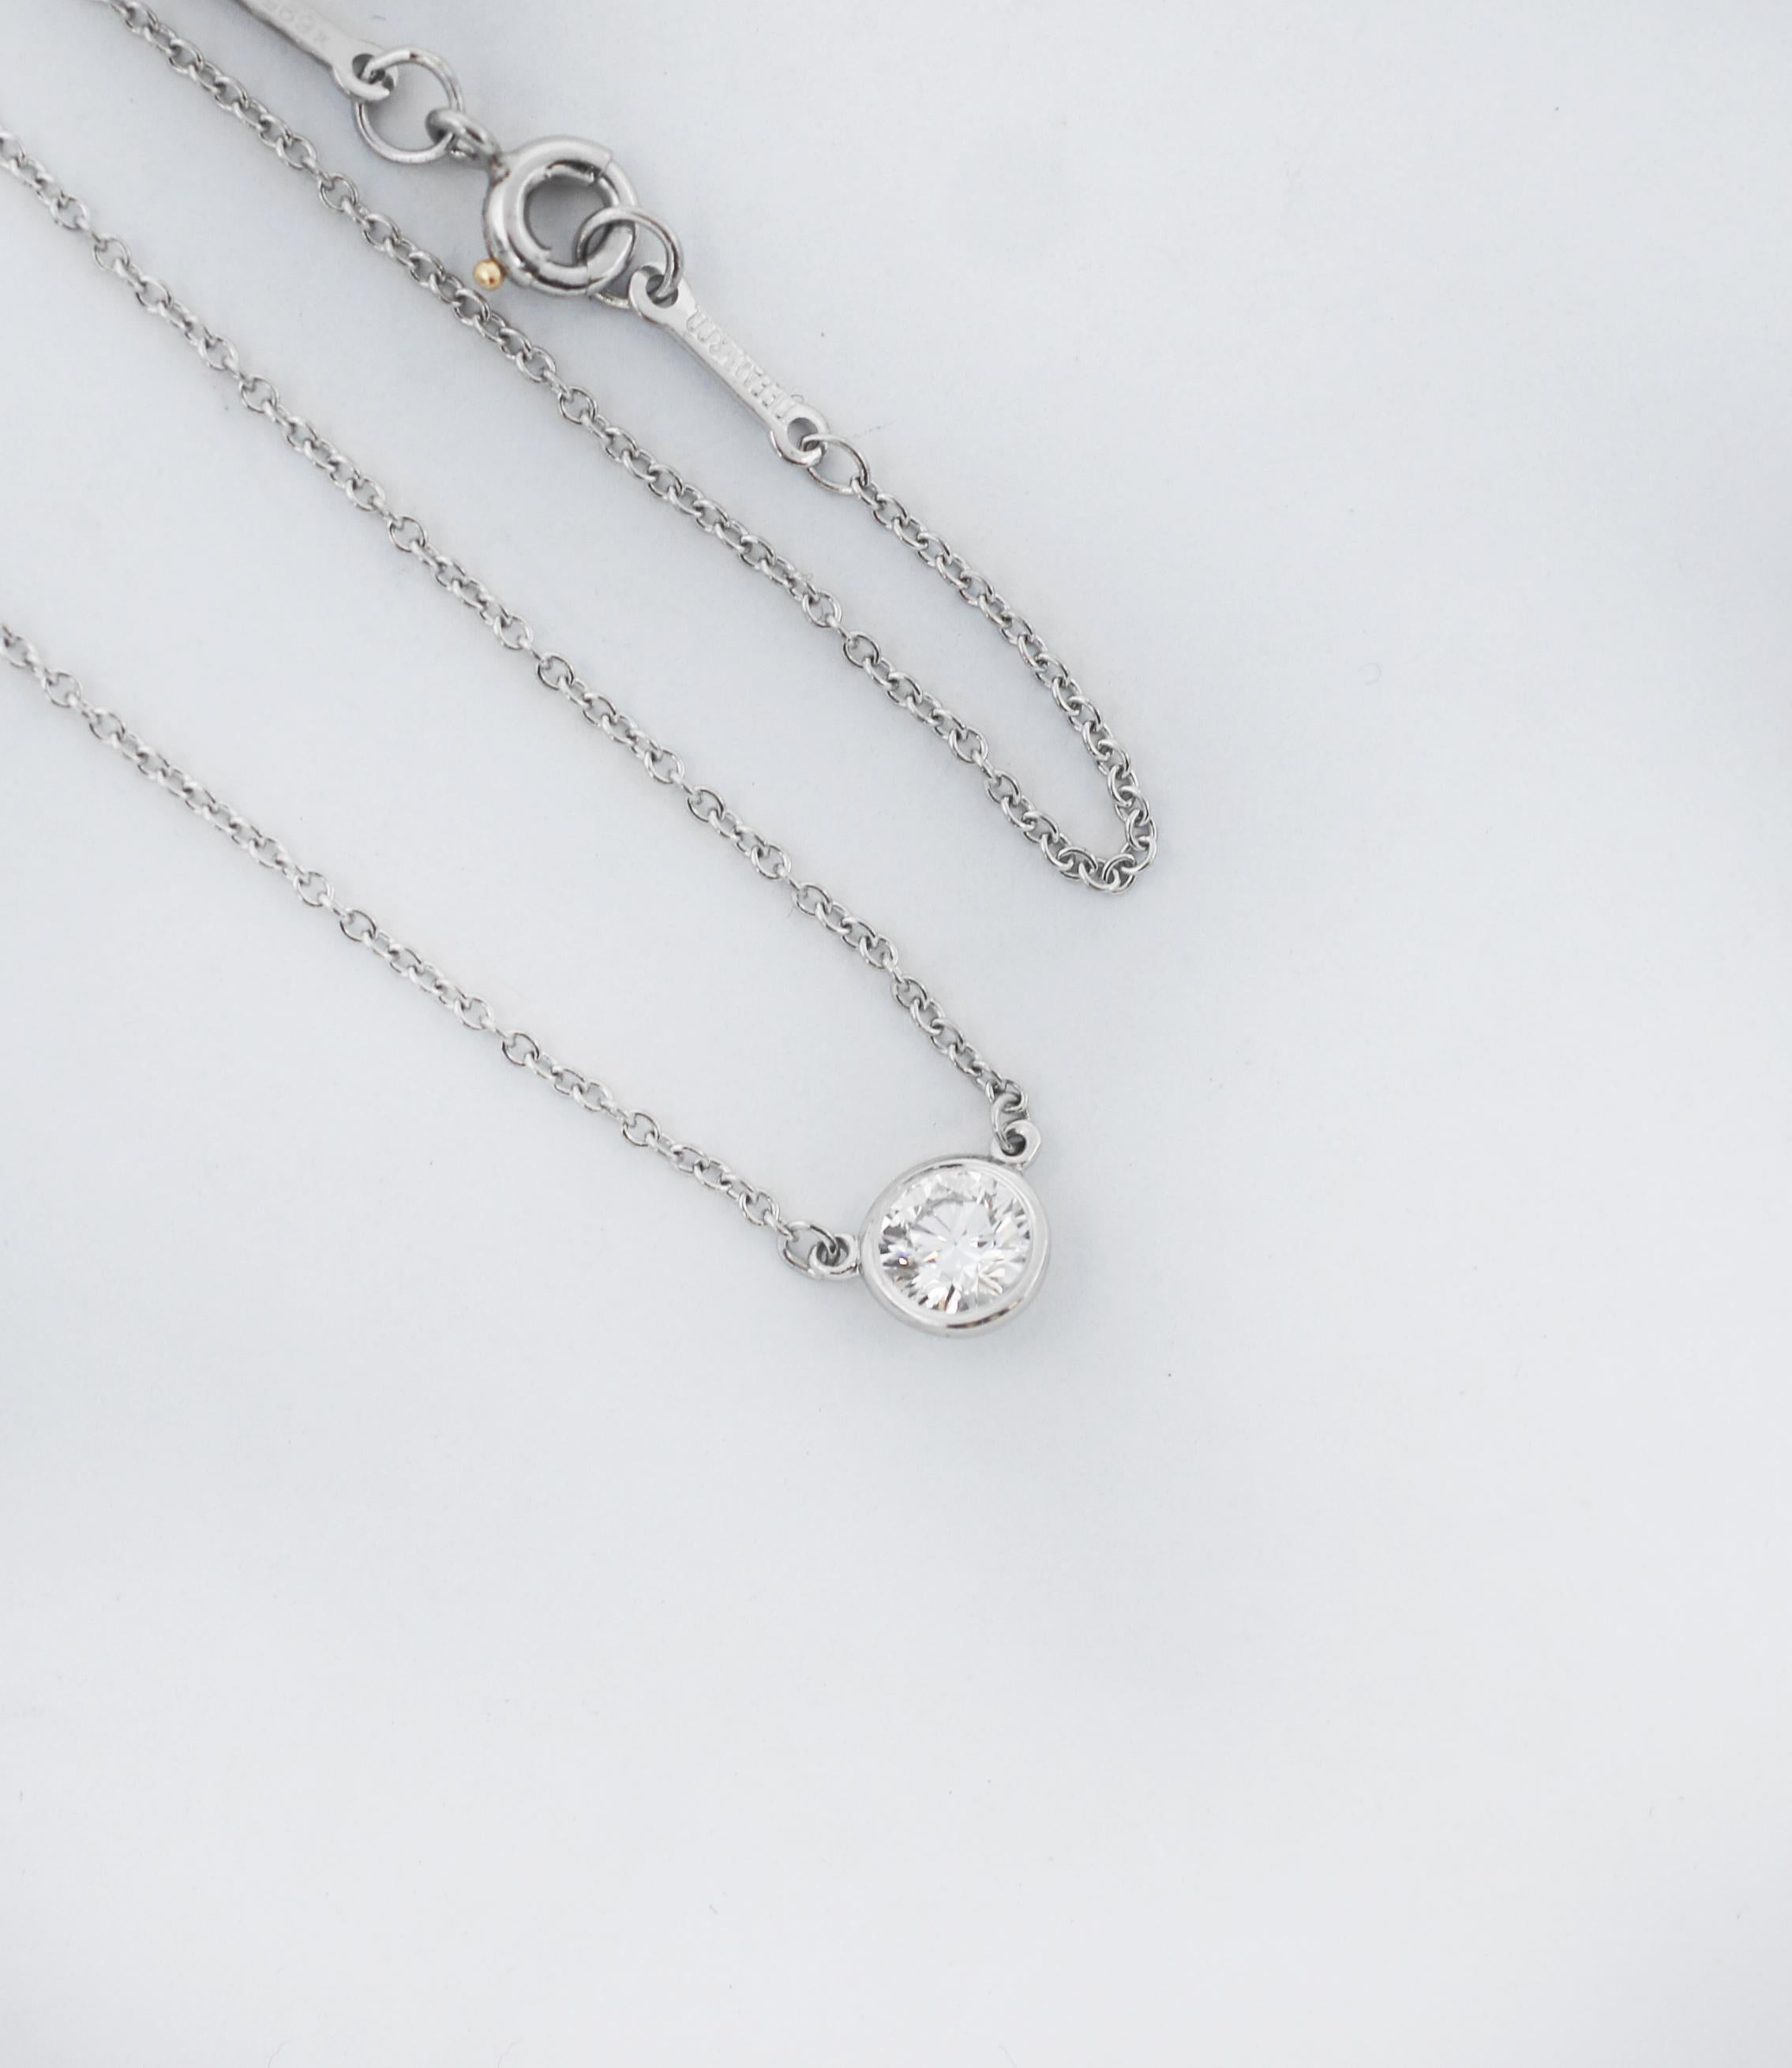 A single hand-polished diamond shines at the center of this delicate and refined platinum pendant. Elsa Peretti’s revolutionary Diamonds by the Yard collection features a combination of fine, fluid chains and bezel-set stones that forever changed